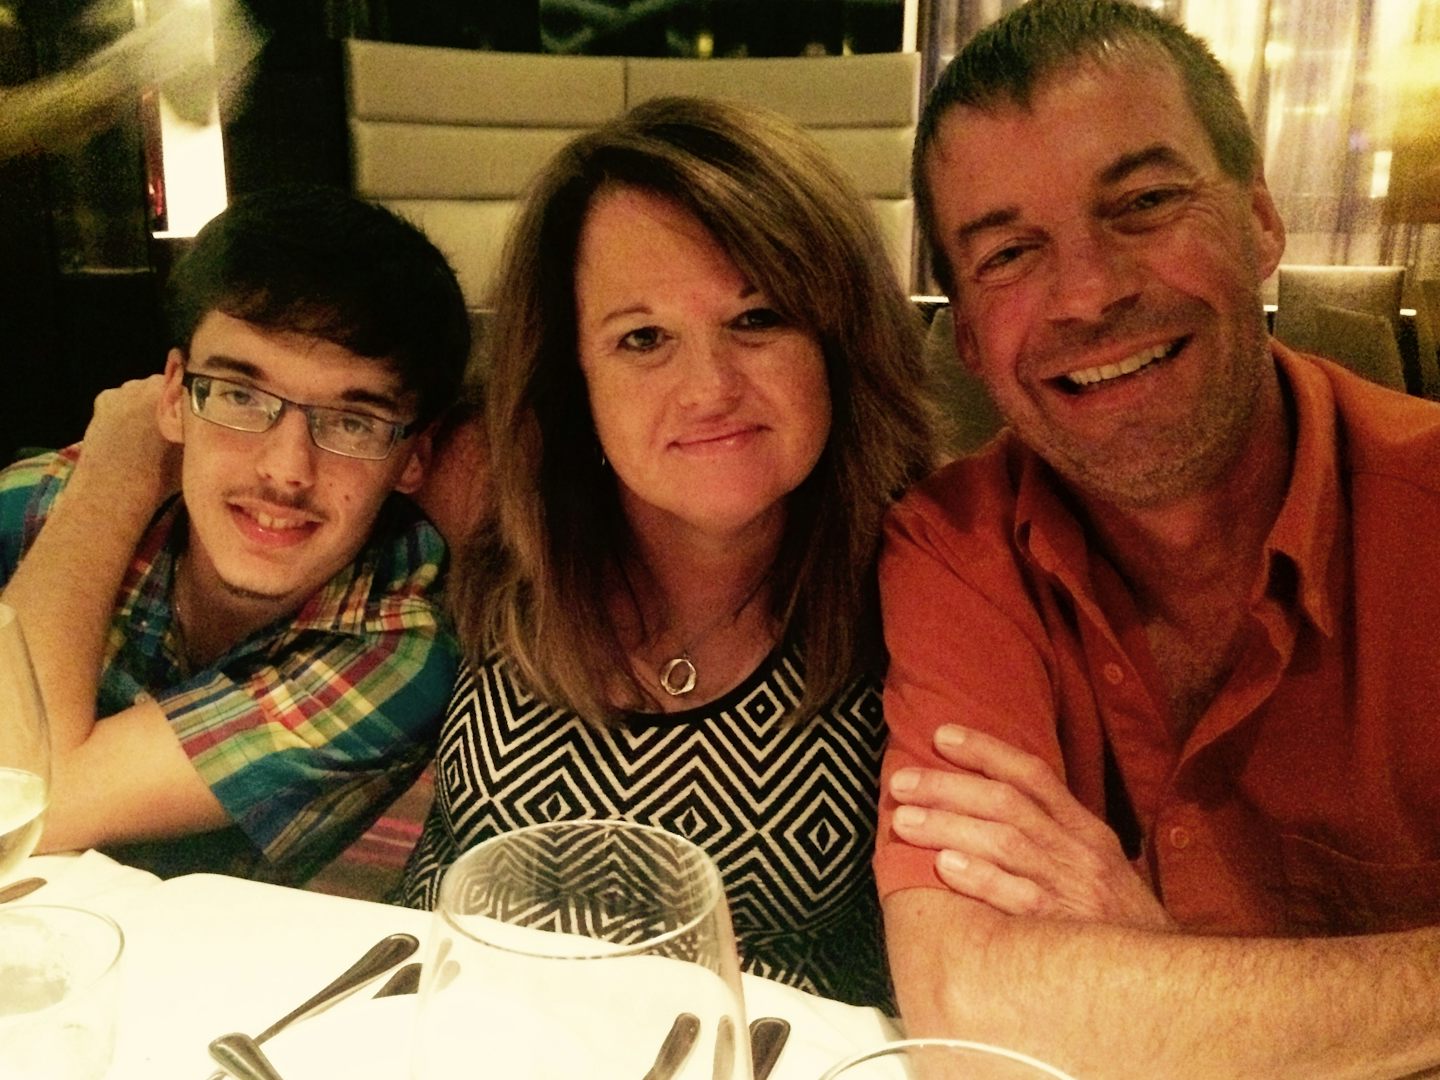 Brad Traci & Mark out for dinner!